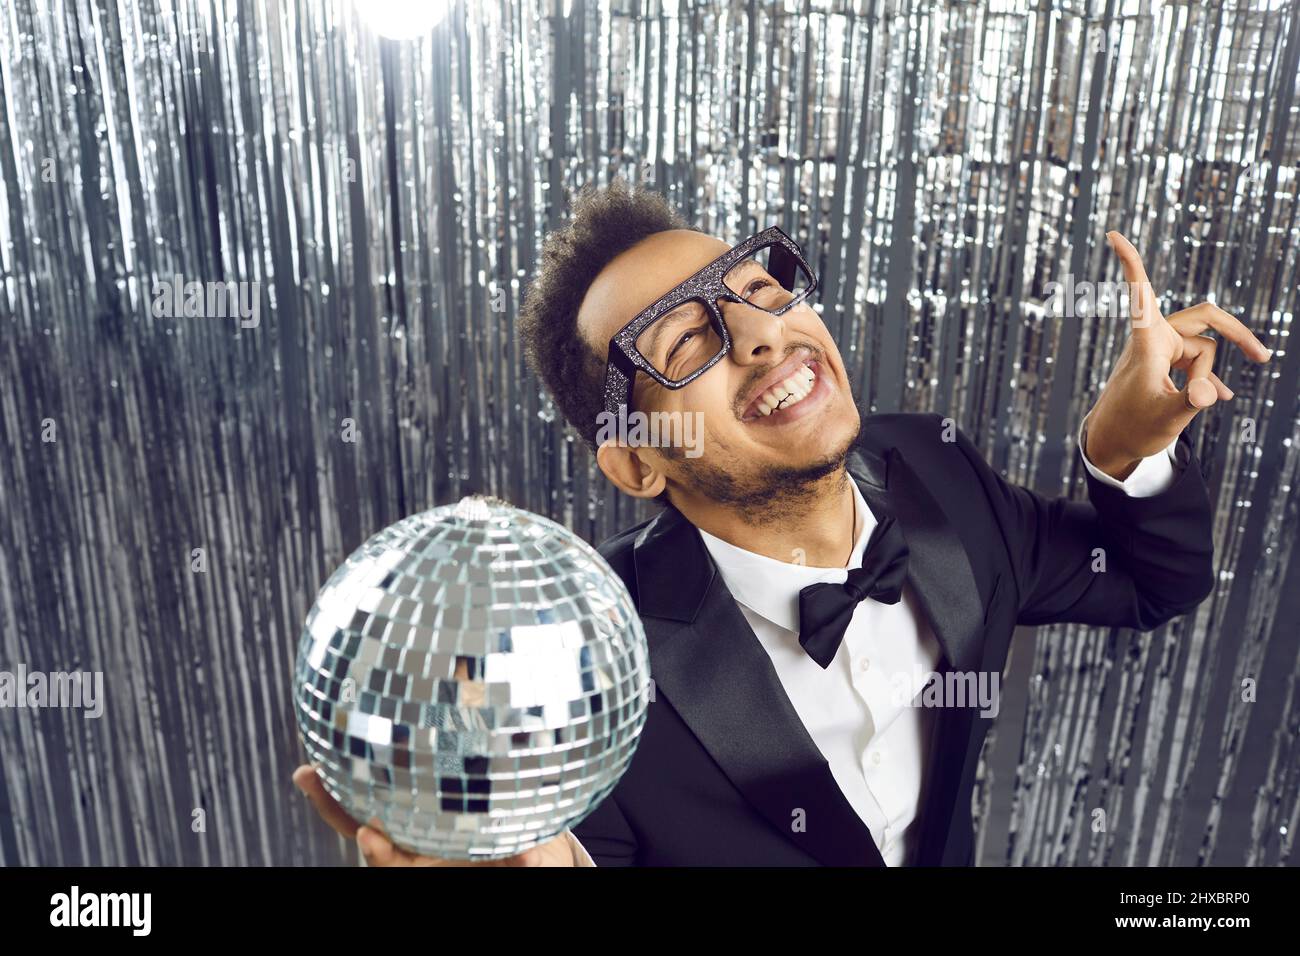 Happy funny young black guy in tuxedo and glasses dancing and having fun at party Stock Photo